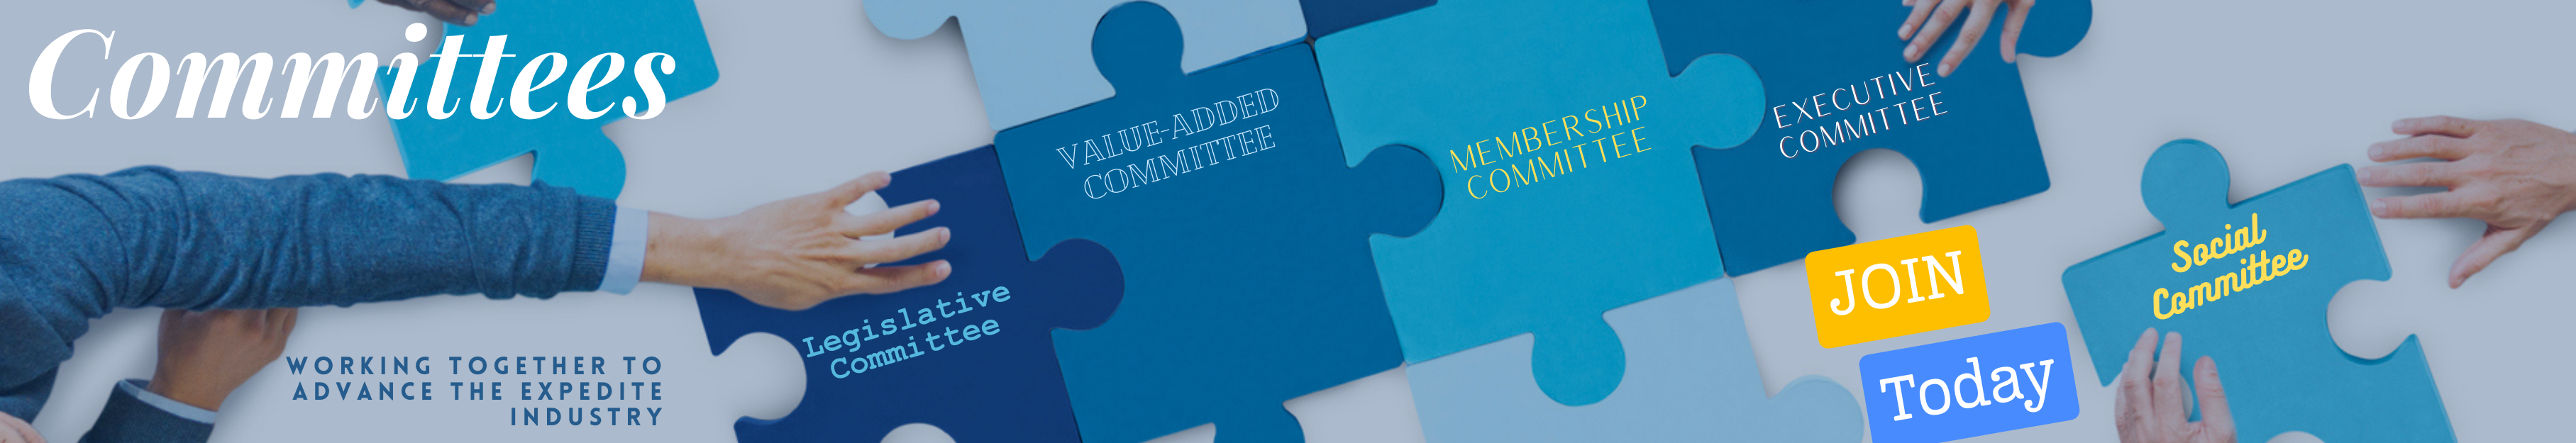 Committees Banner